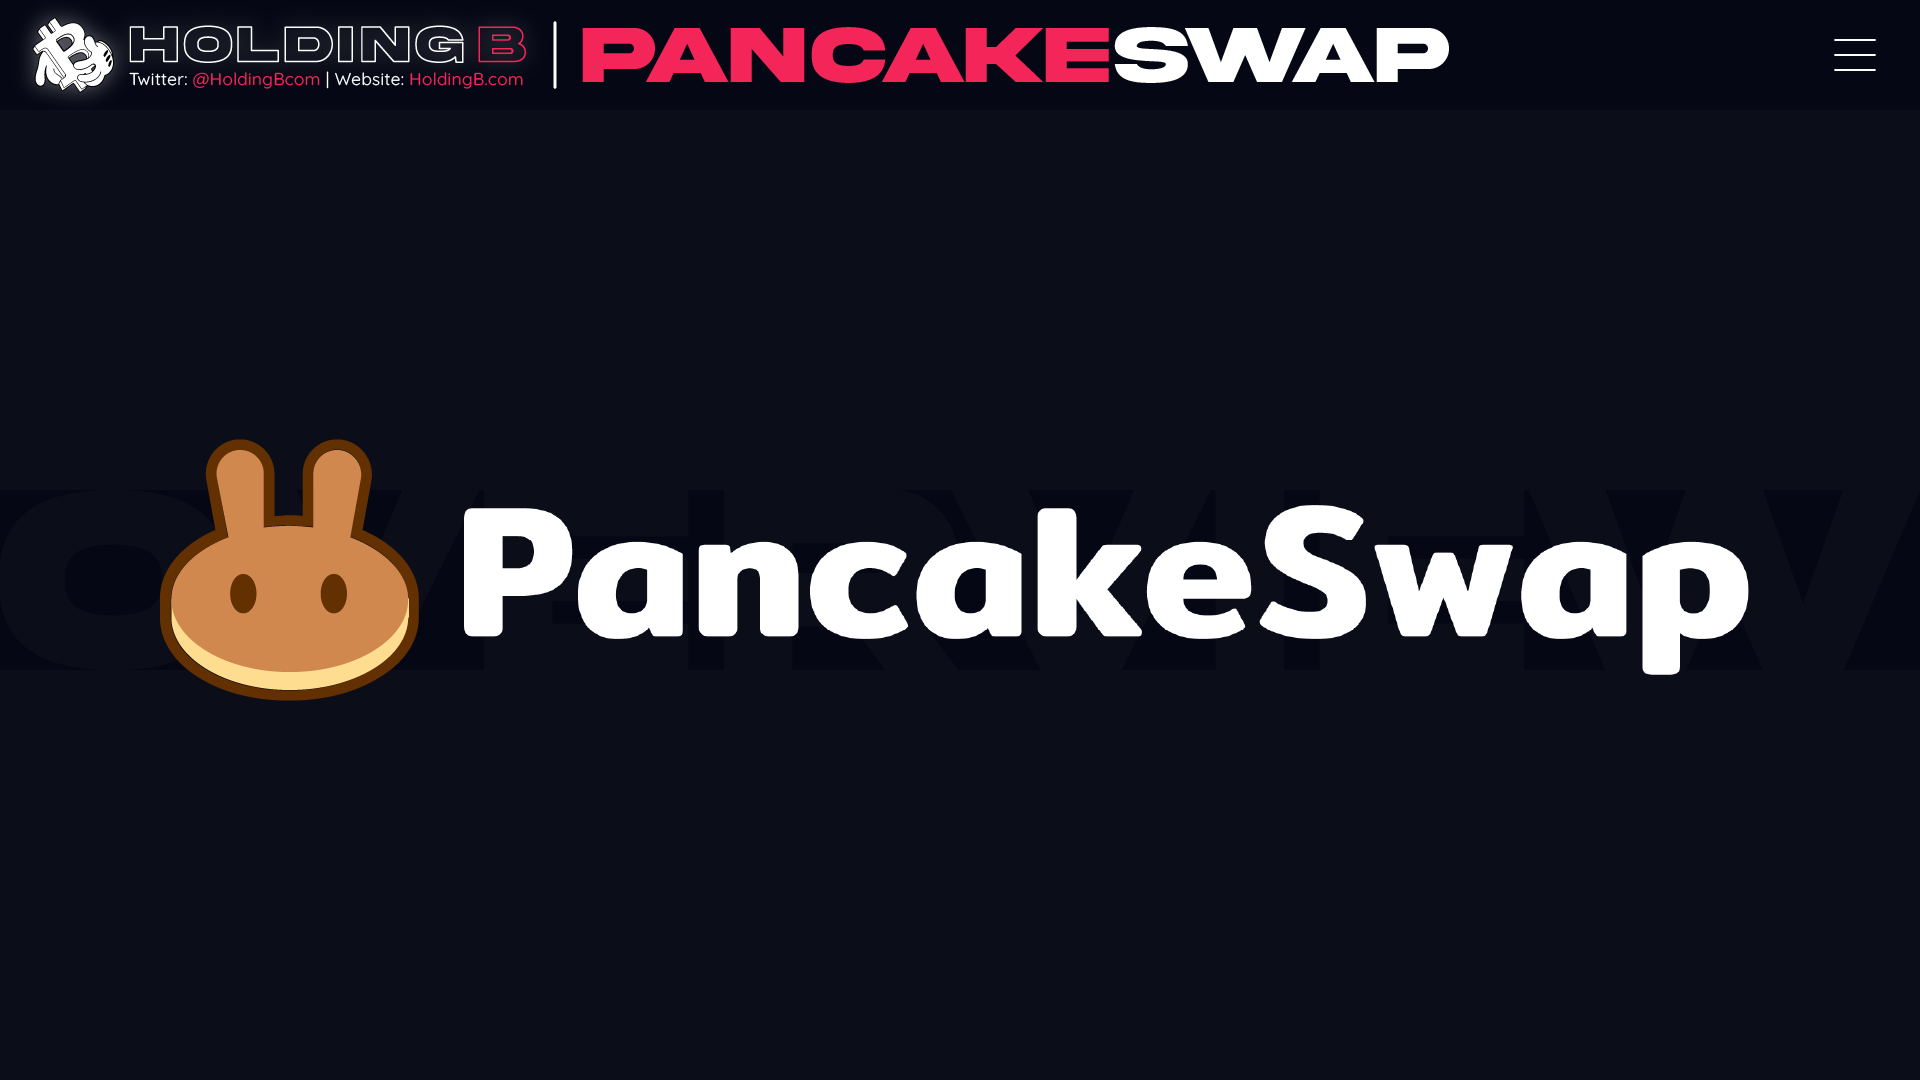 WHAT IS PANCAKESWAP?